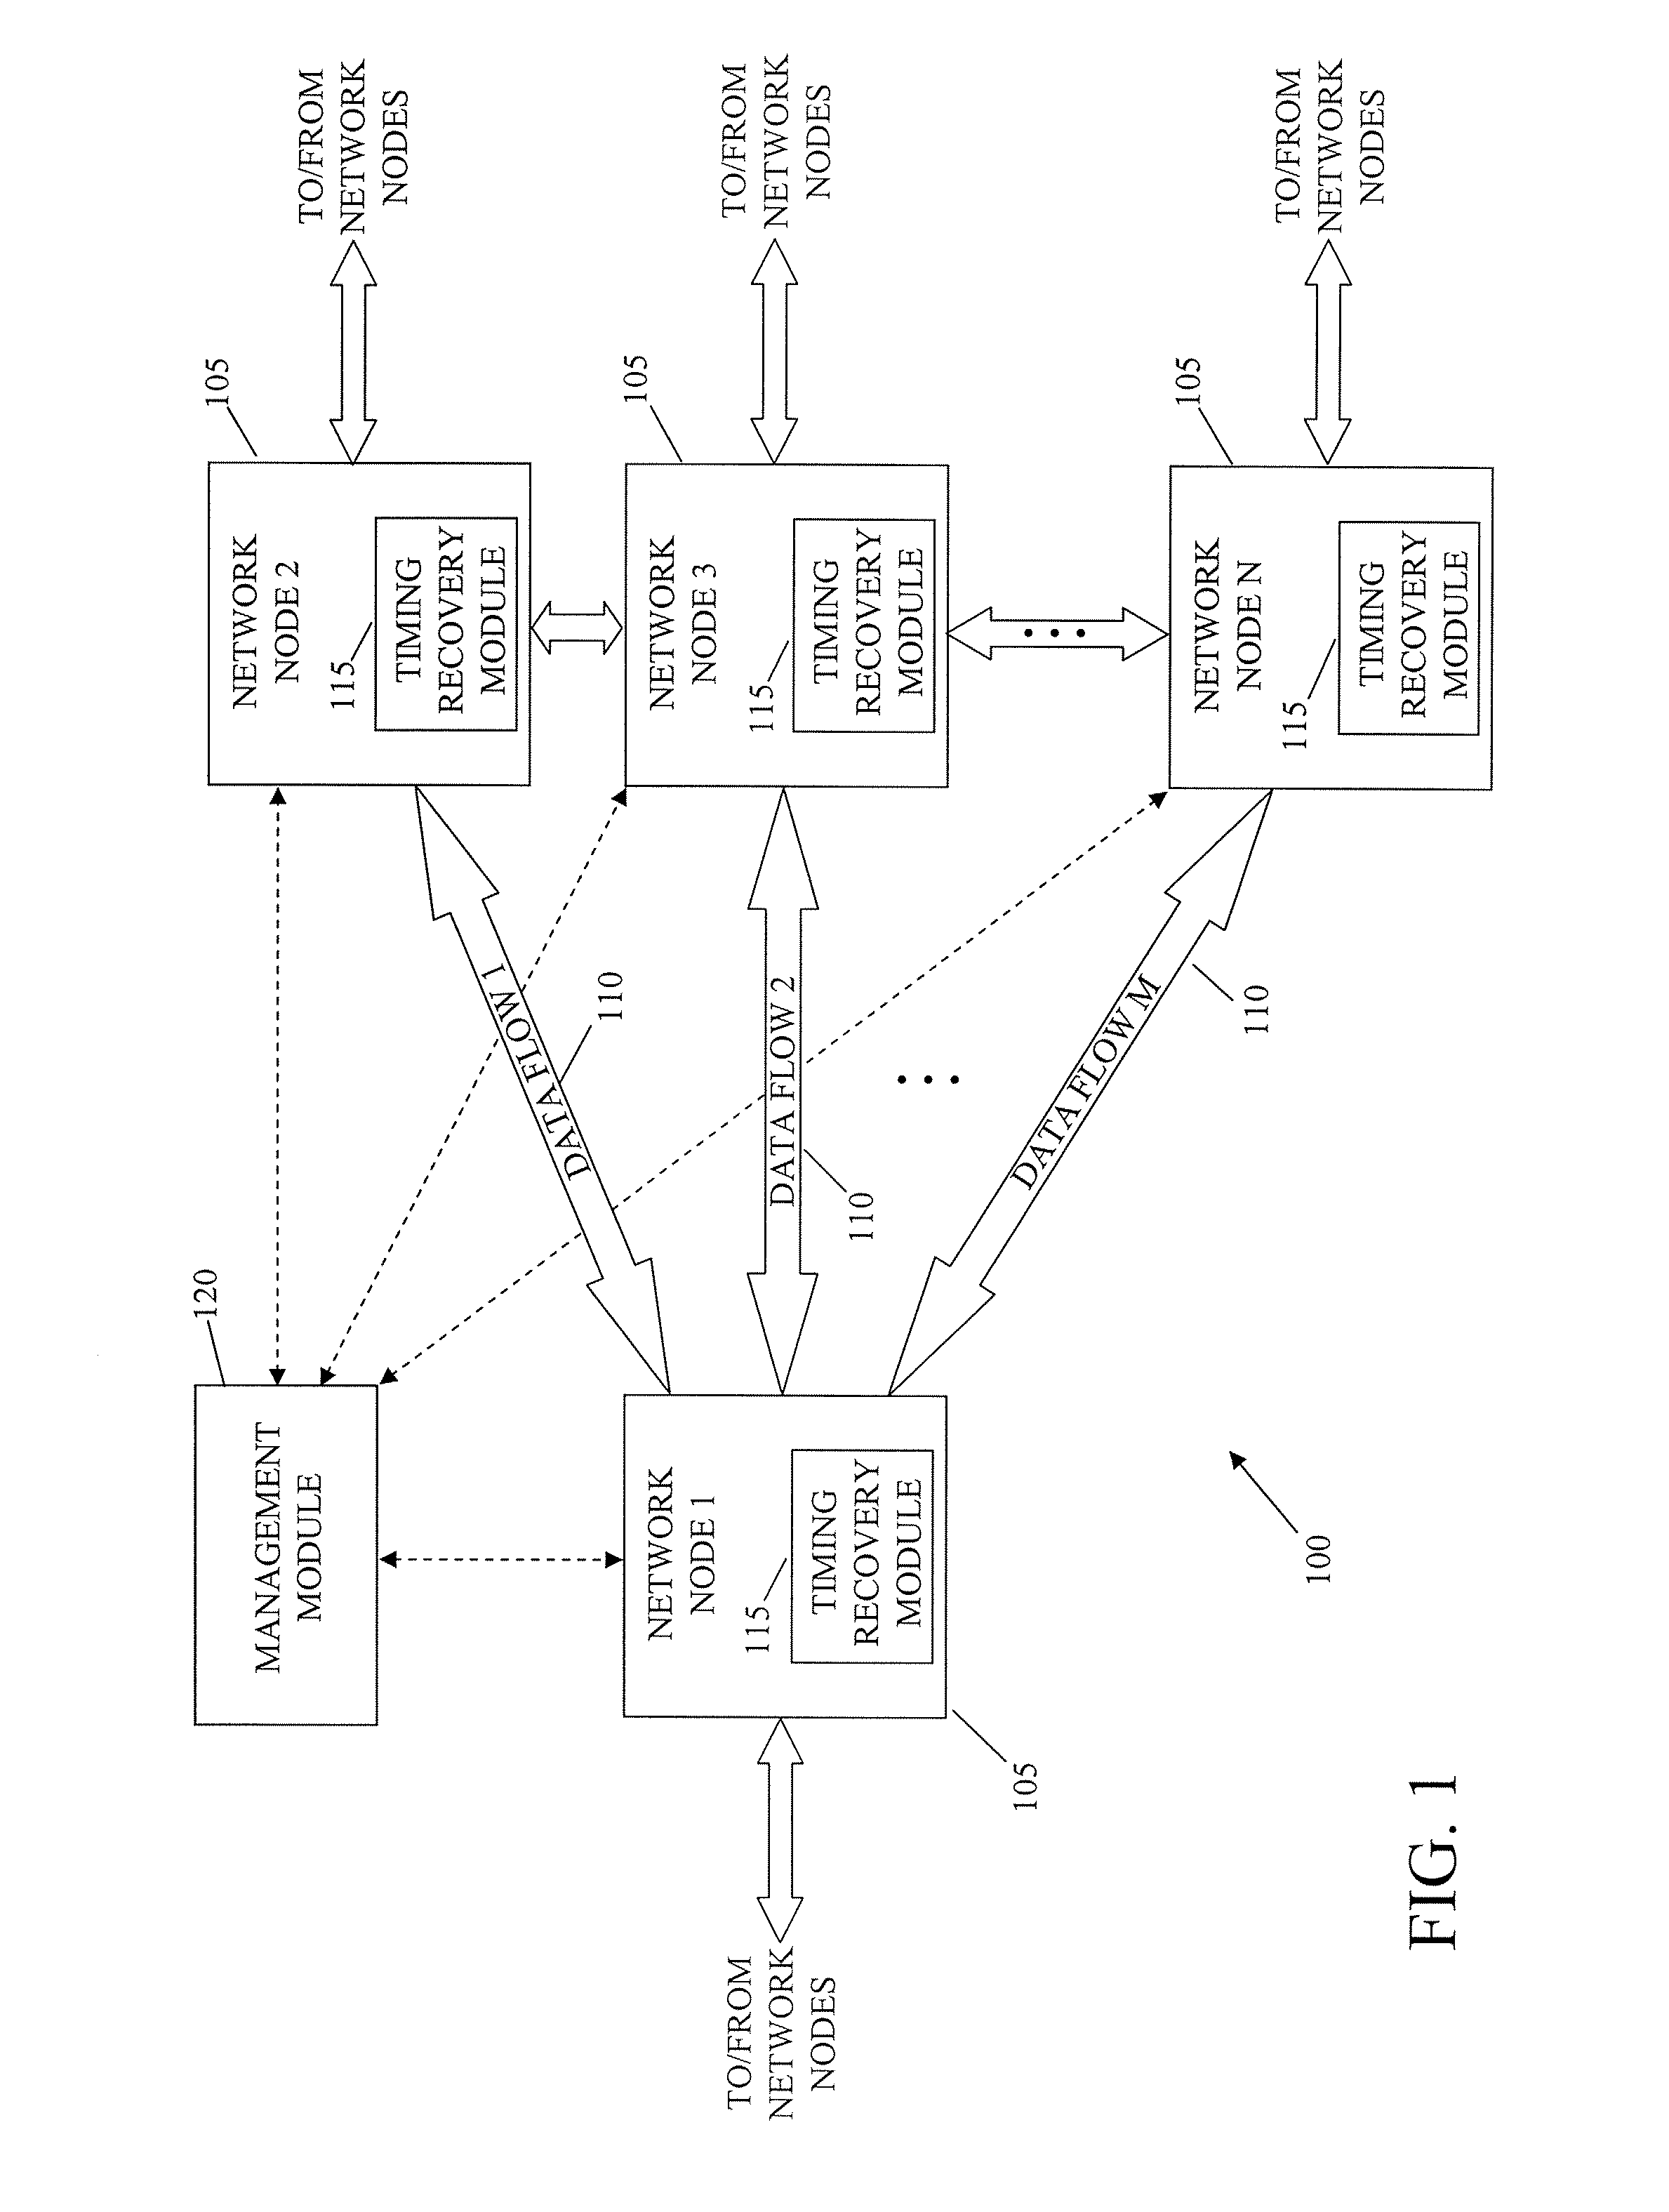 System and method for packet timing of circuit emulation services over networks